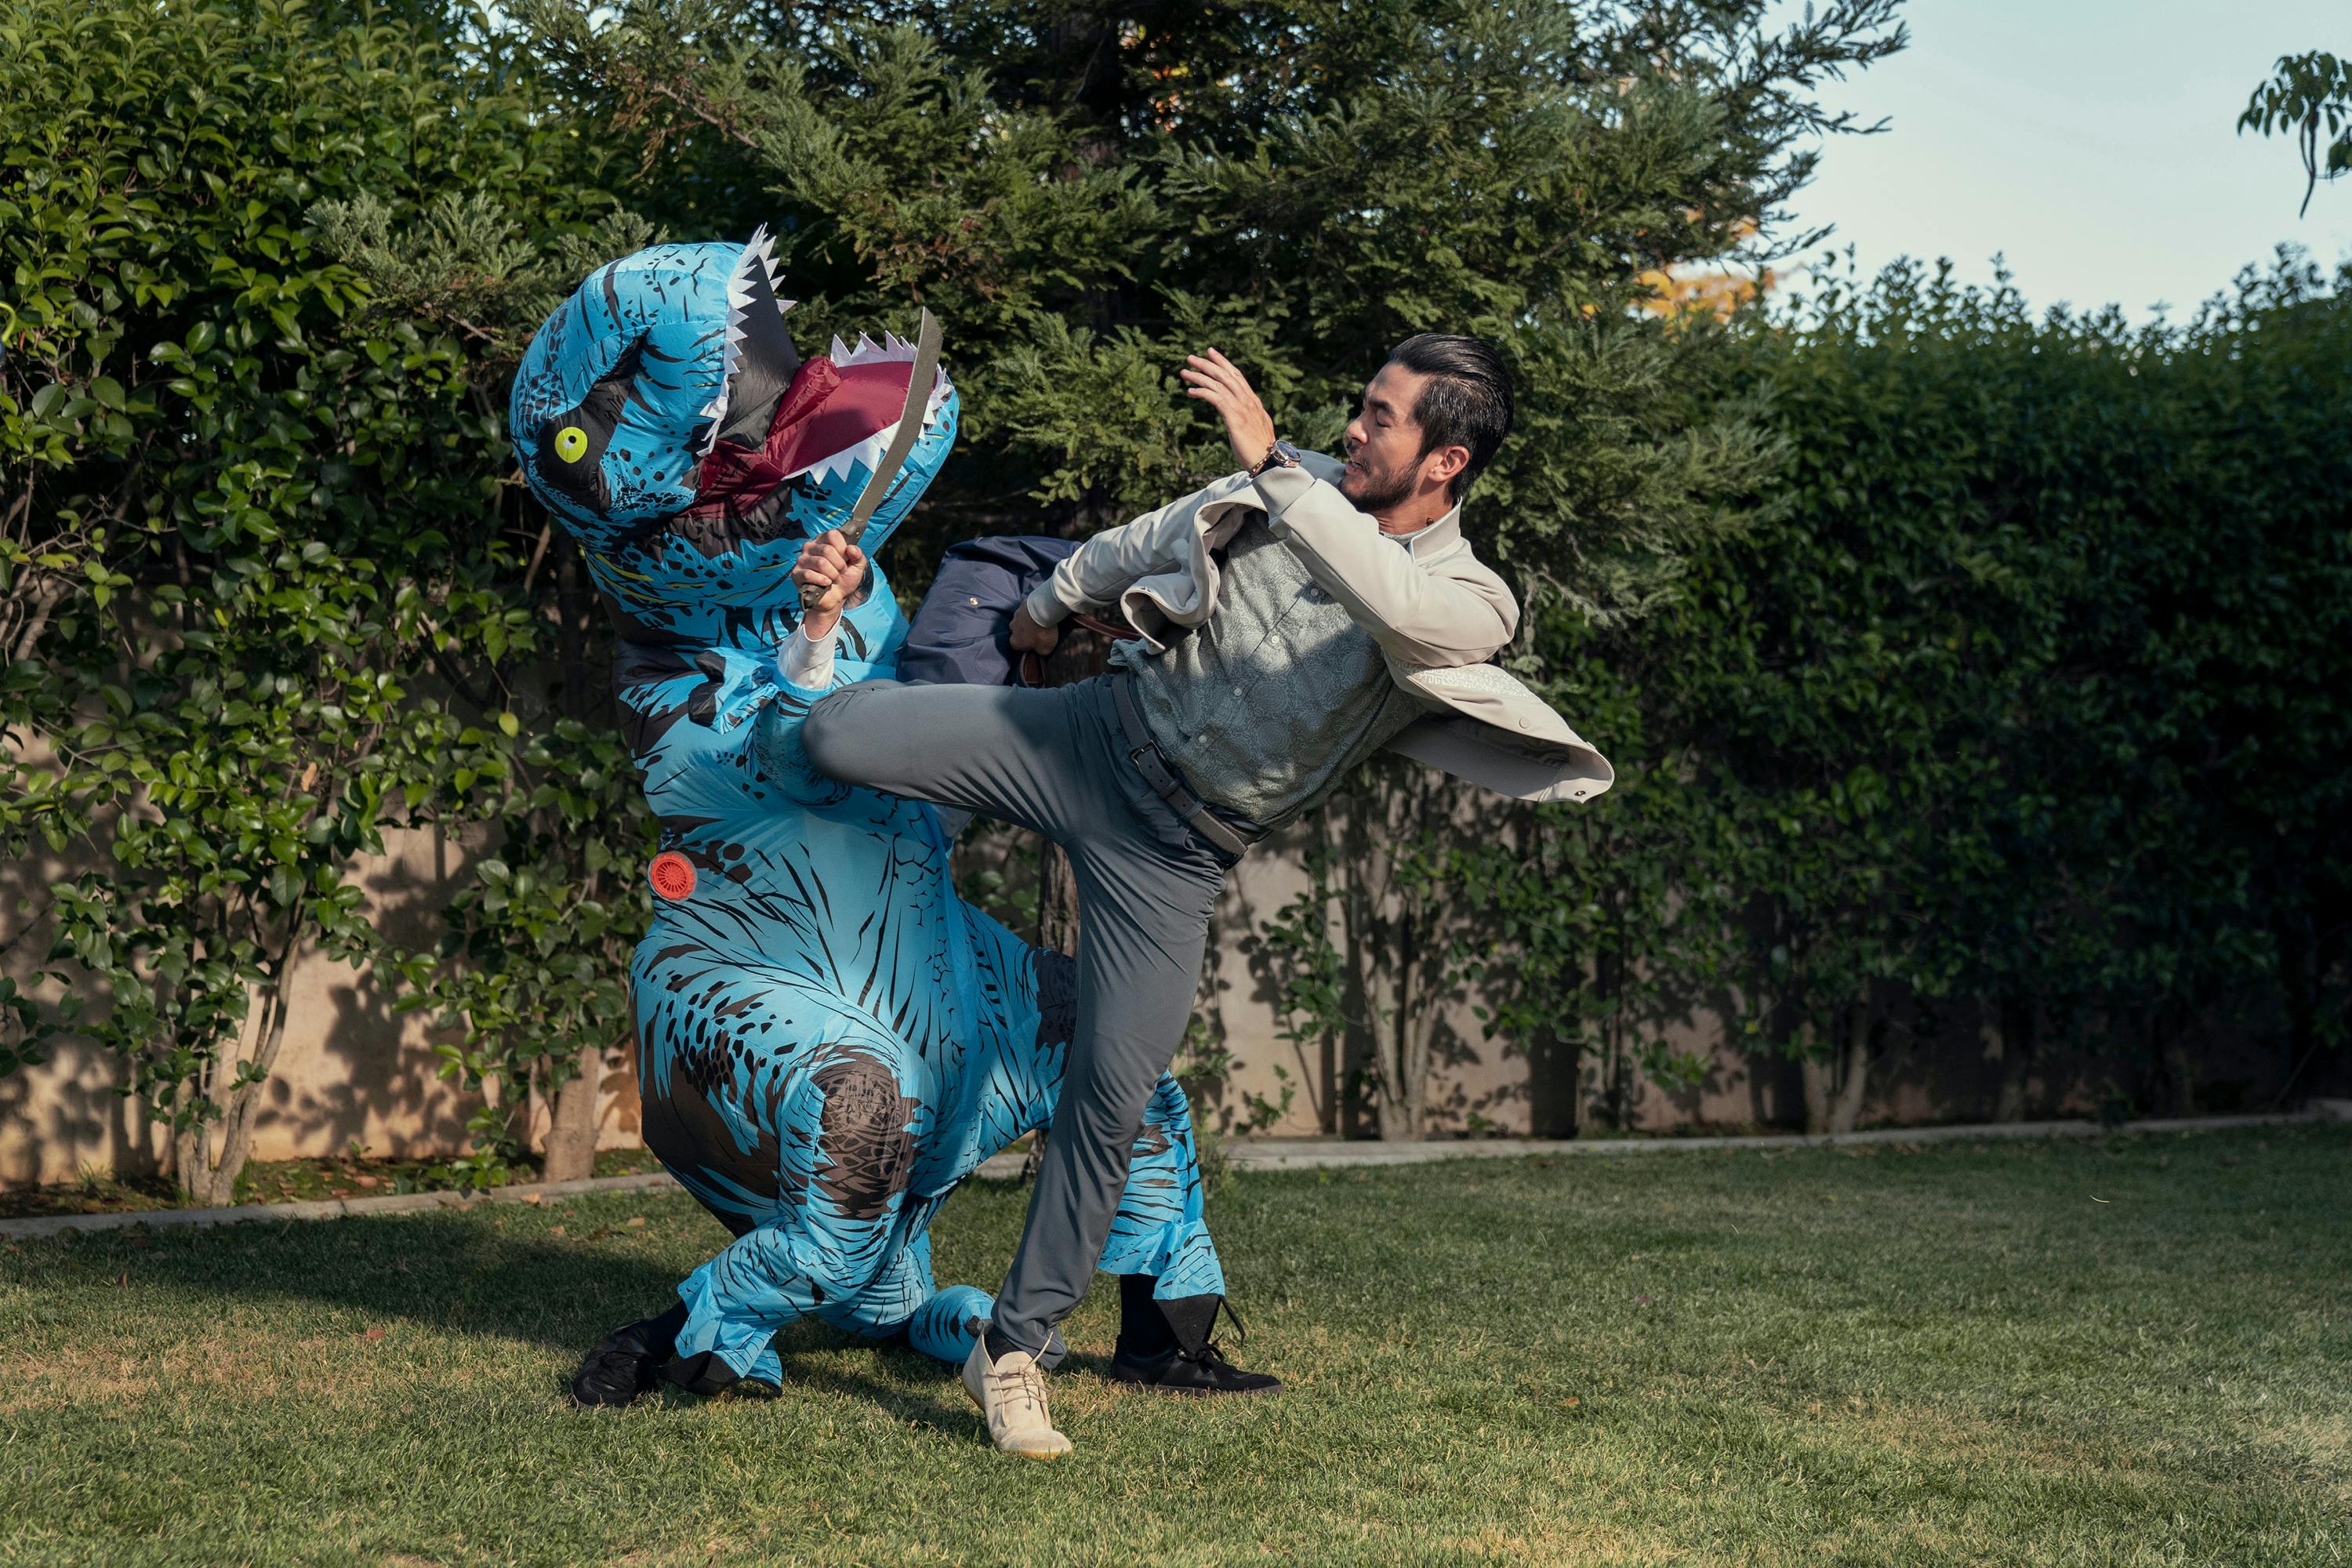 Charles Sun (Justin Chien) kicks someone in a blow-up dinosaur costume in a back yard.